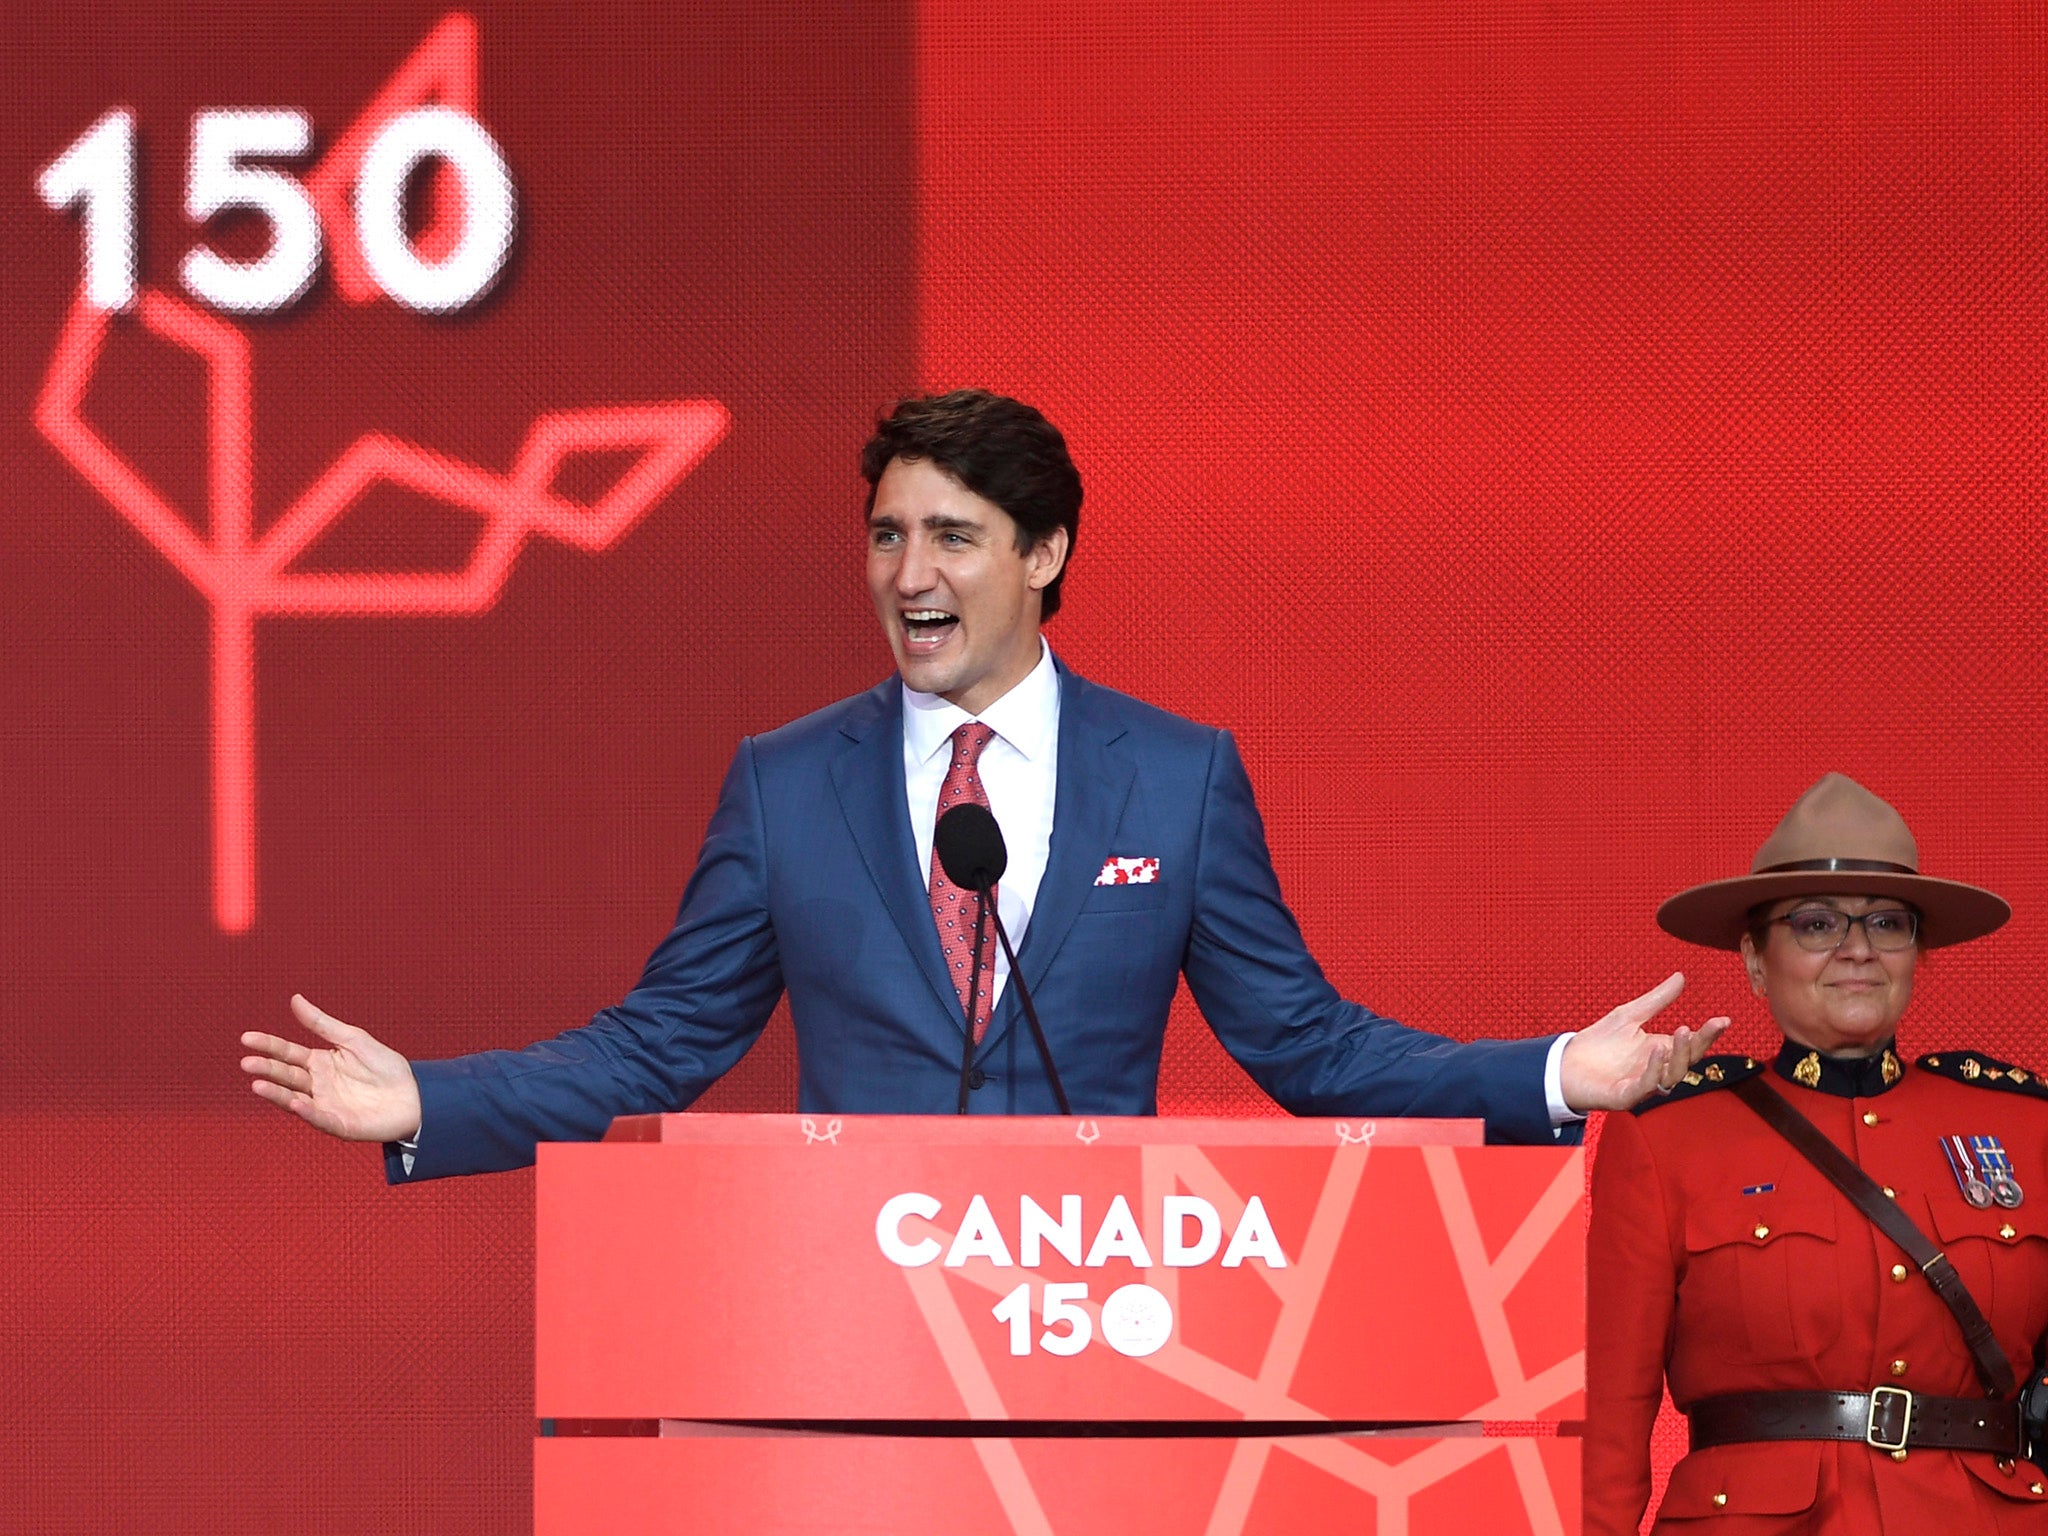 Canadian PM Justin Trudeau’s ratings at home are falling as parts of the nation struggle, but his Liberal Party thinks it has an answer